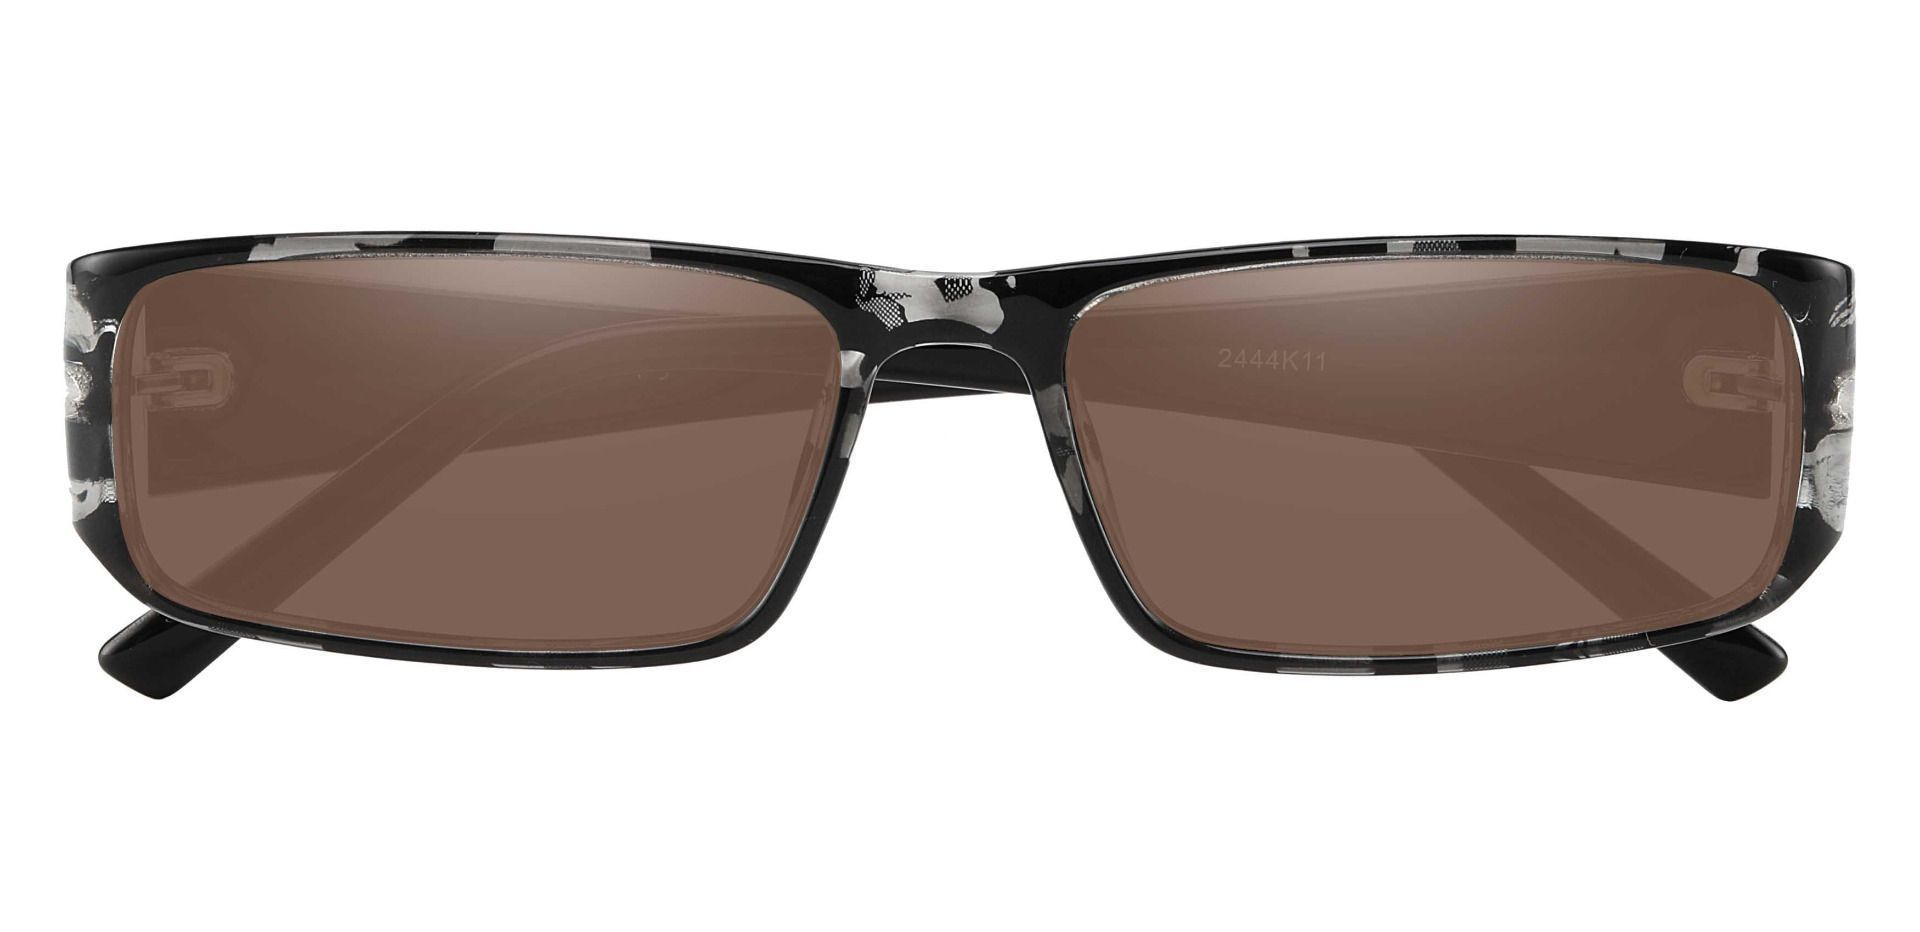 Elbert Rectangle Non-Rx Sunglasses - Black Frame With Brown Lenses